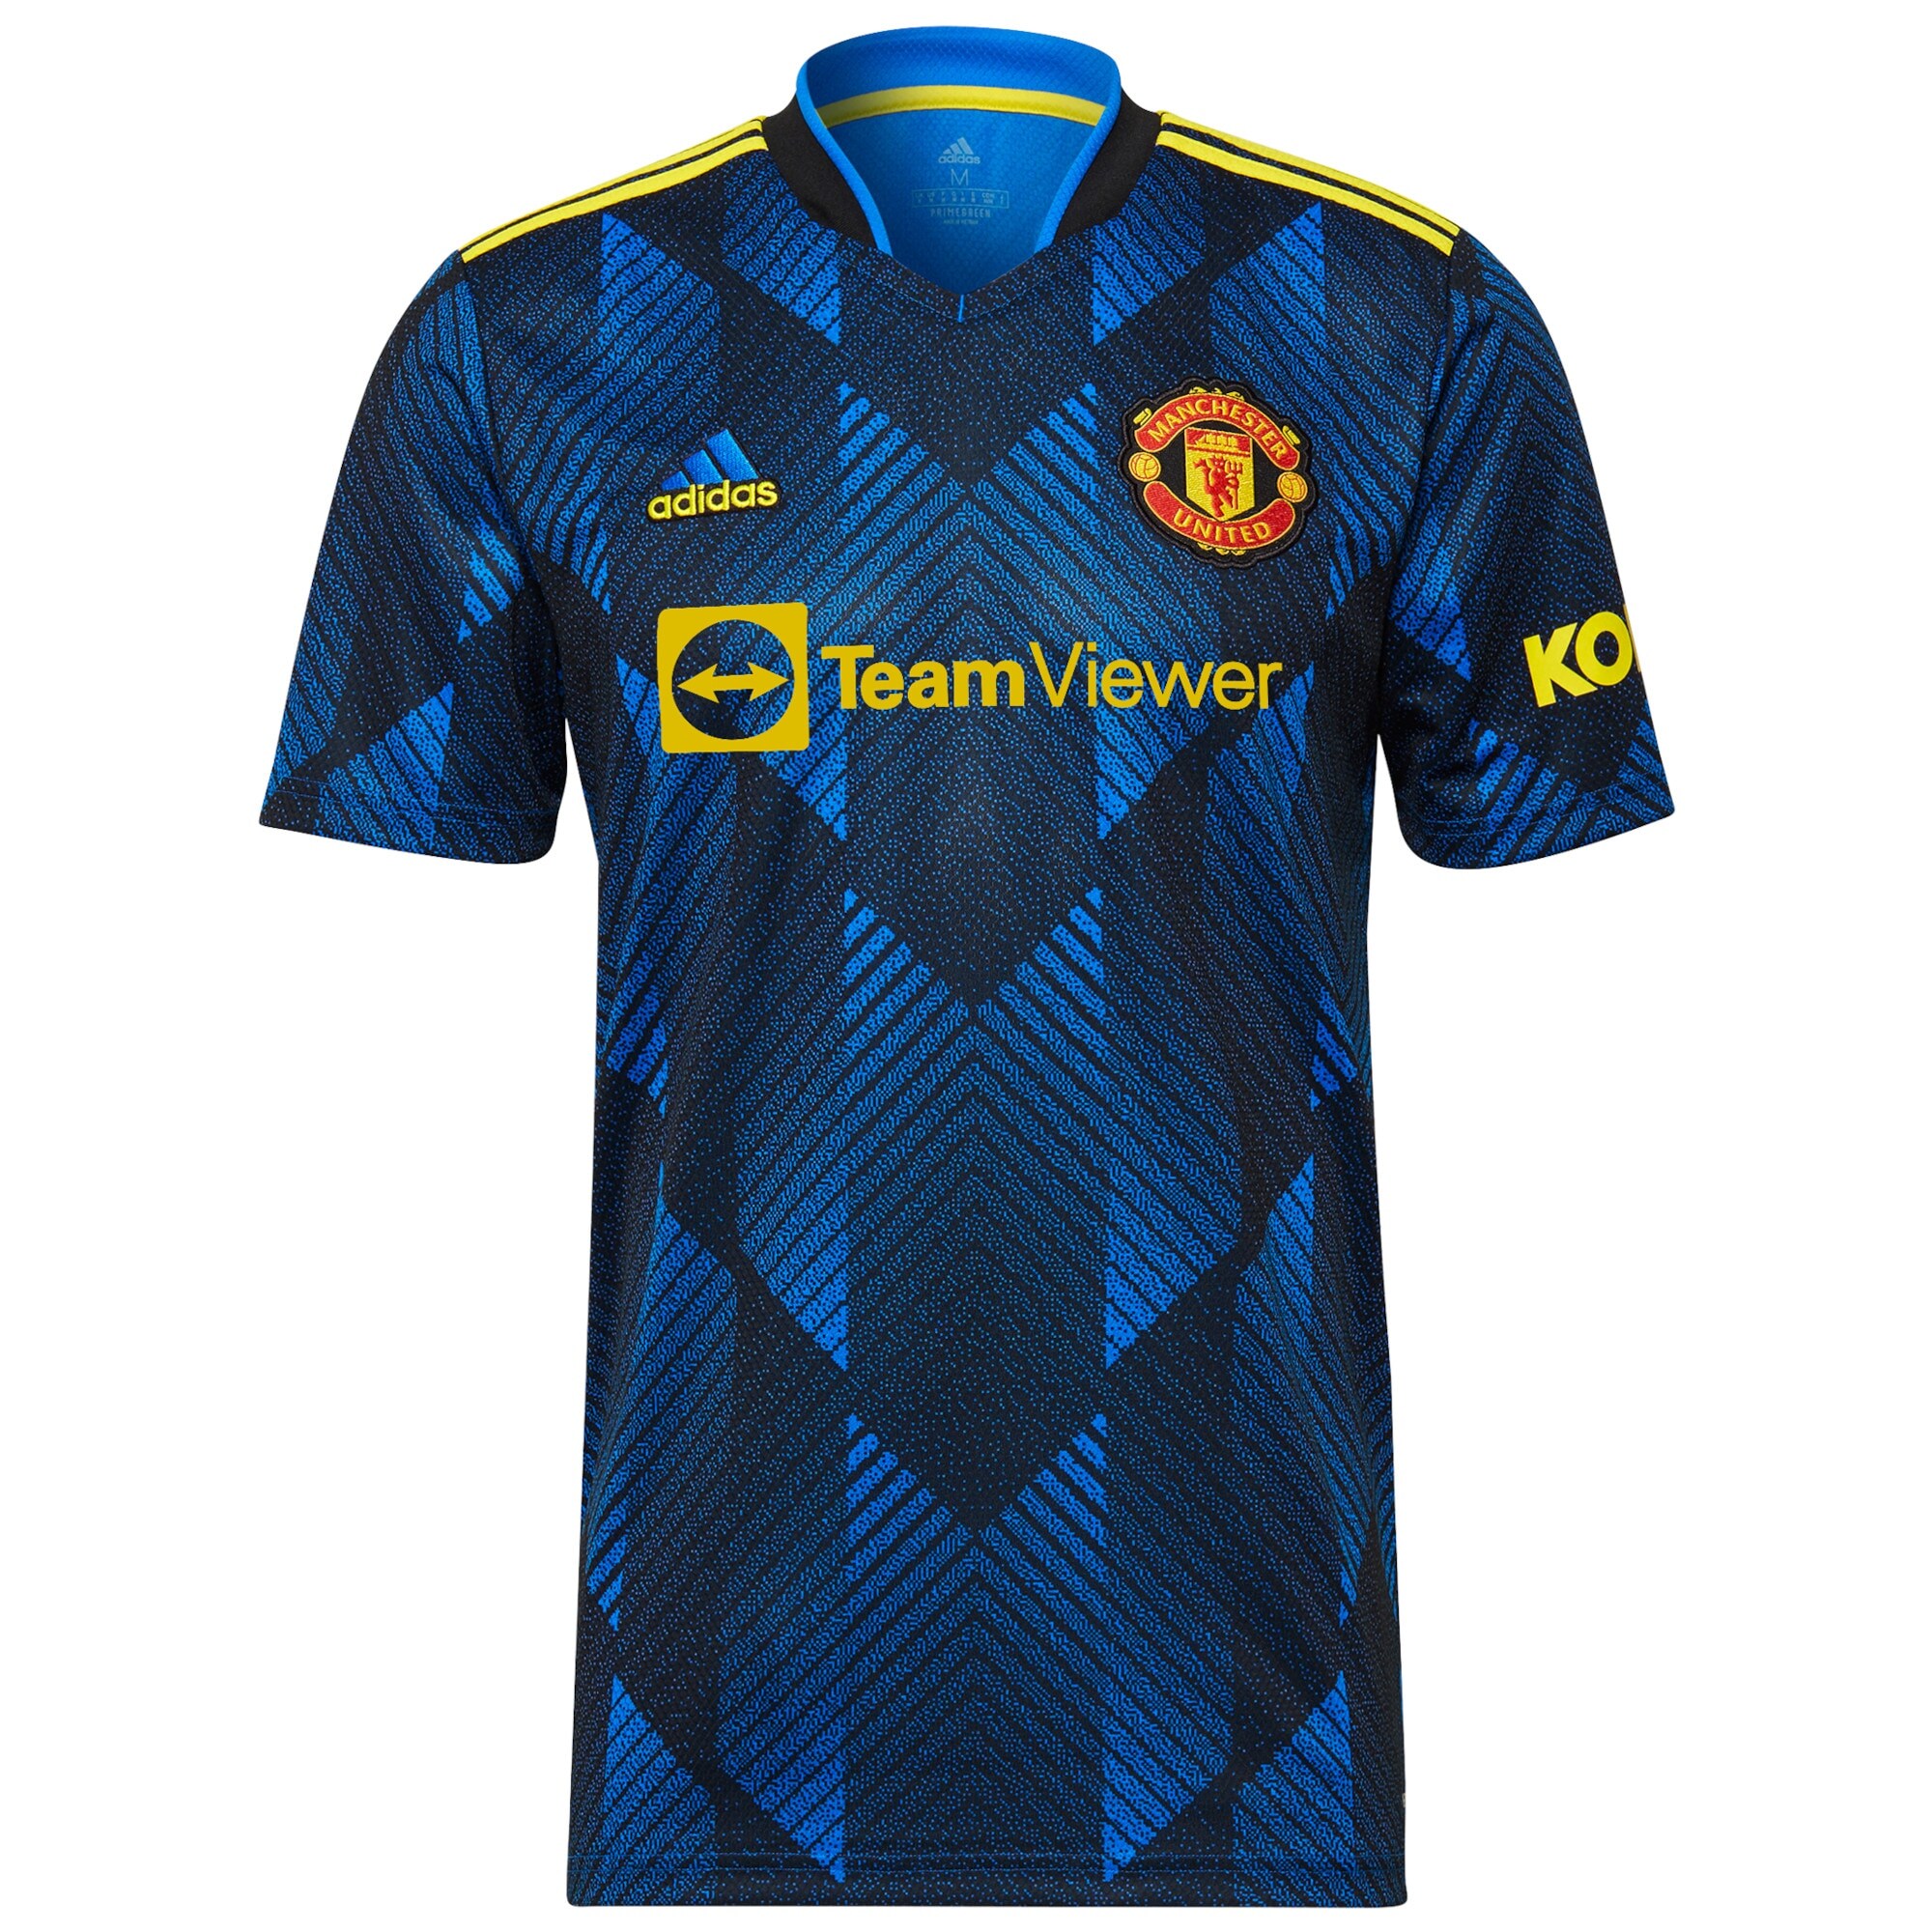 Manchester United Cup Third Shirt 2021-22 with B.Fernandes 18 printing